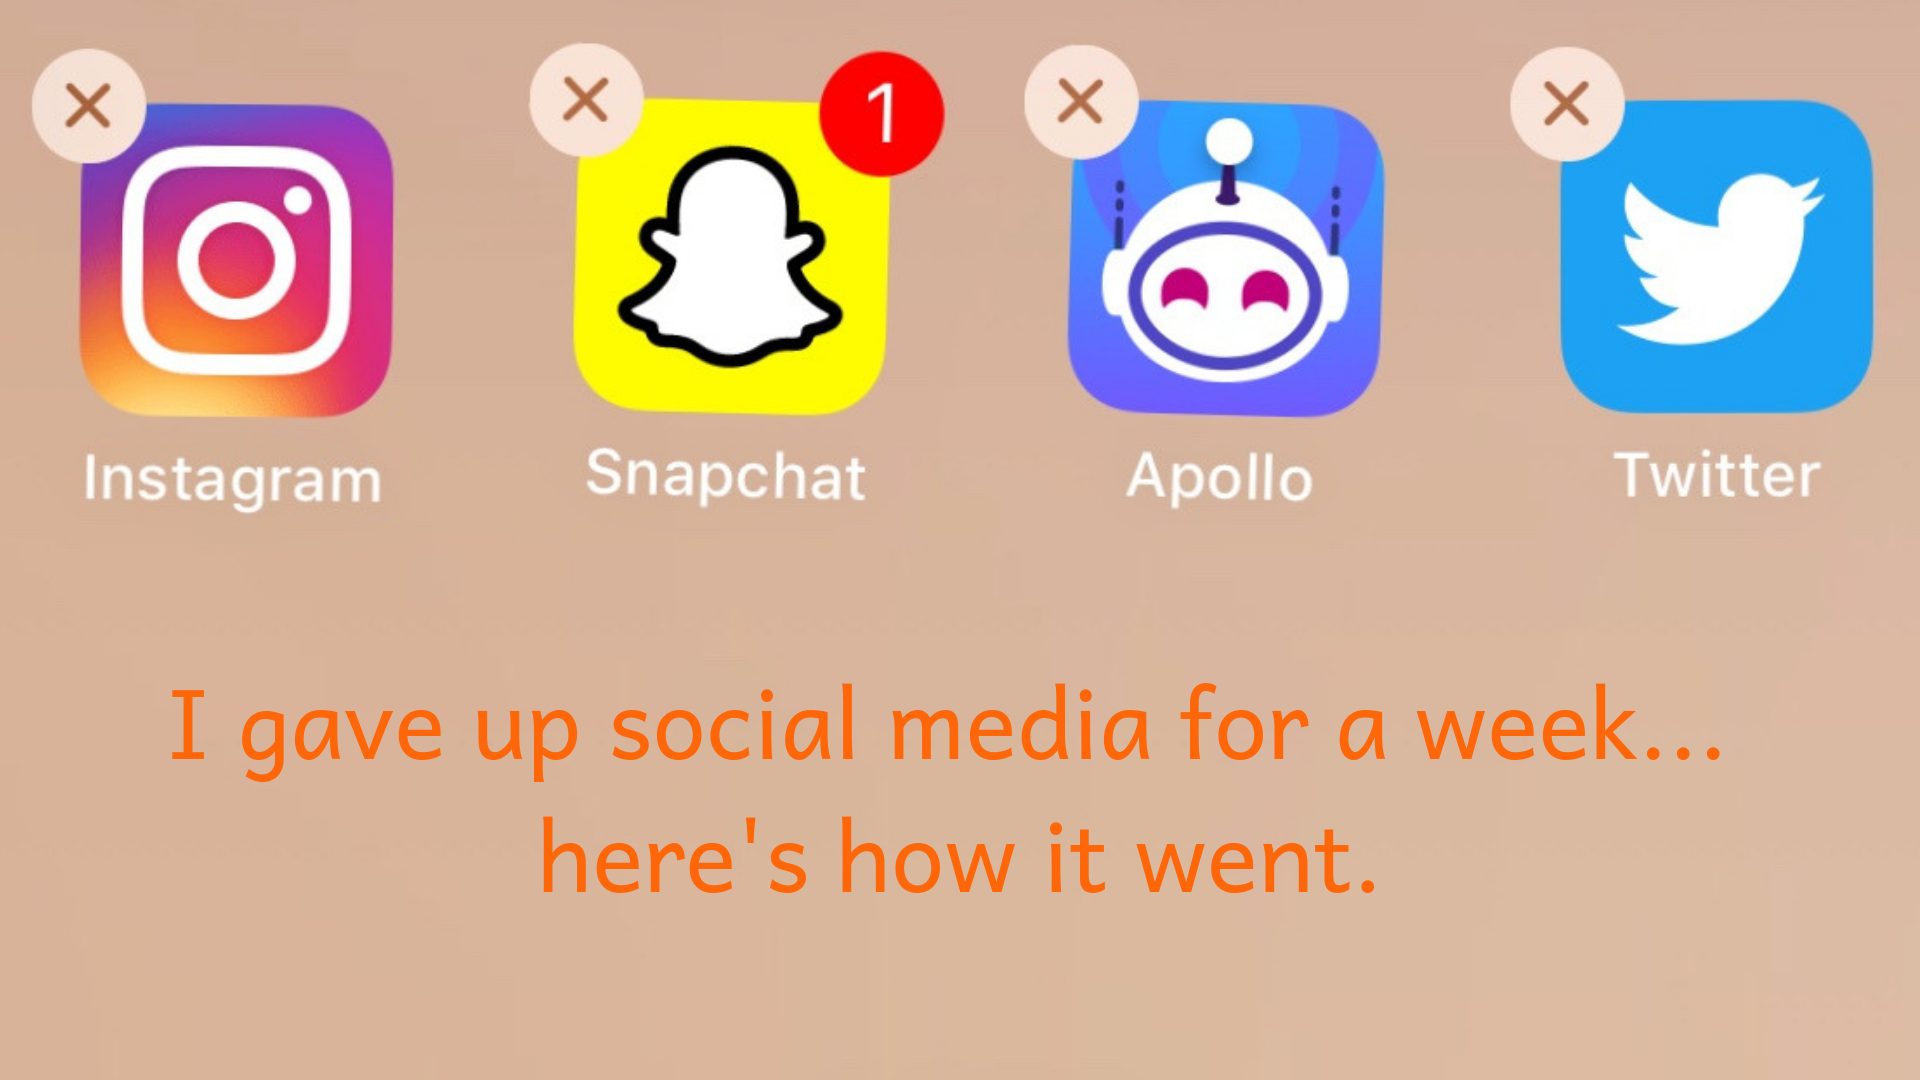 A screenshot of four social media apps with the “x” in the corner of the apps ready to be deleted. The apps from left to right are Instagram, Snapchat, Reddit Apollo, and Twitter. Under the image is the text, “I deleted social media for a week… Here’s how it went.”